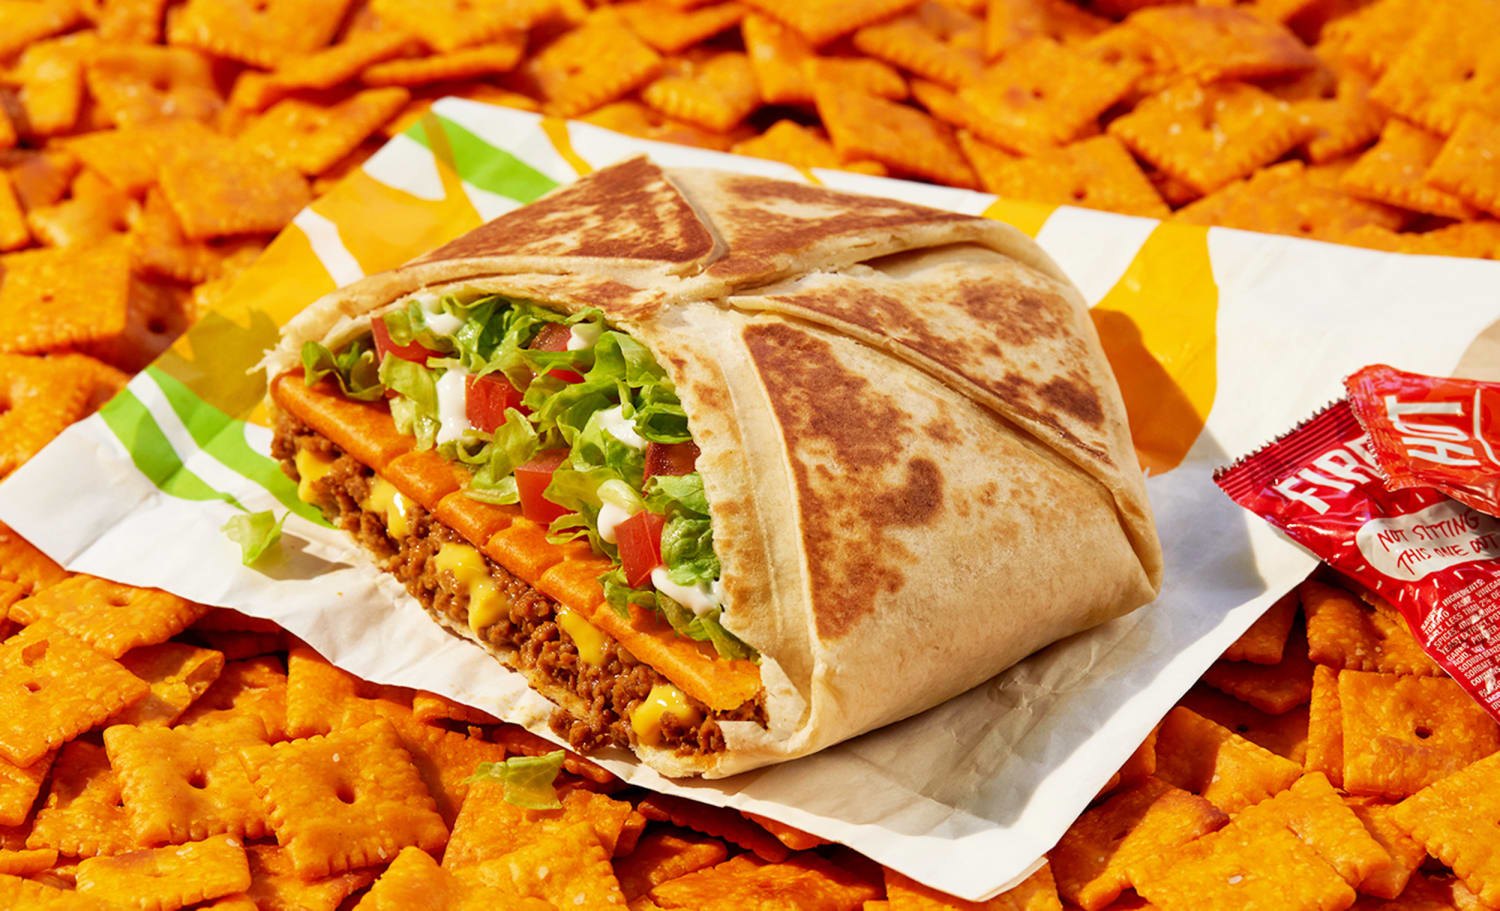 Taco Bell Launches New Frozen Desserts This Summer: Try the Latest Churro and Coffee Chillers!